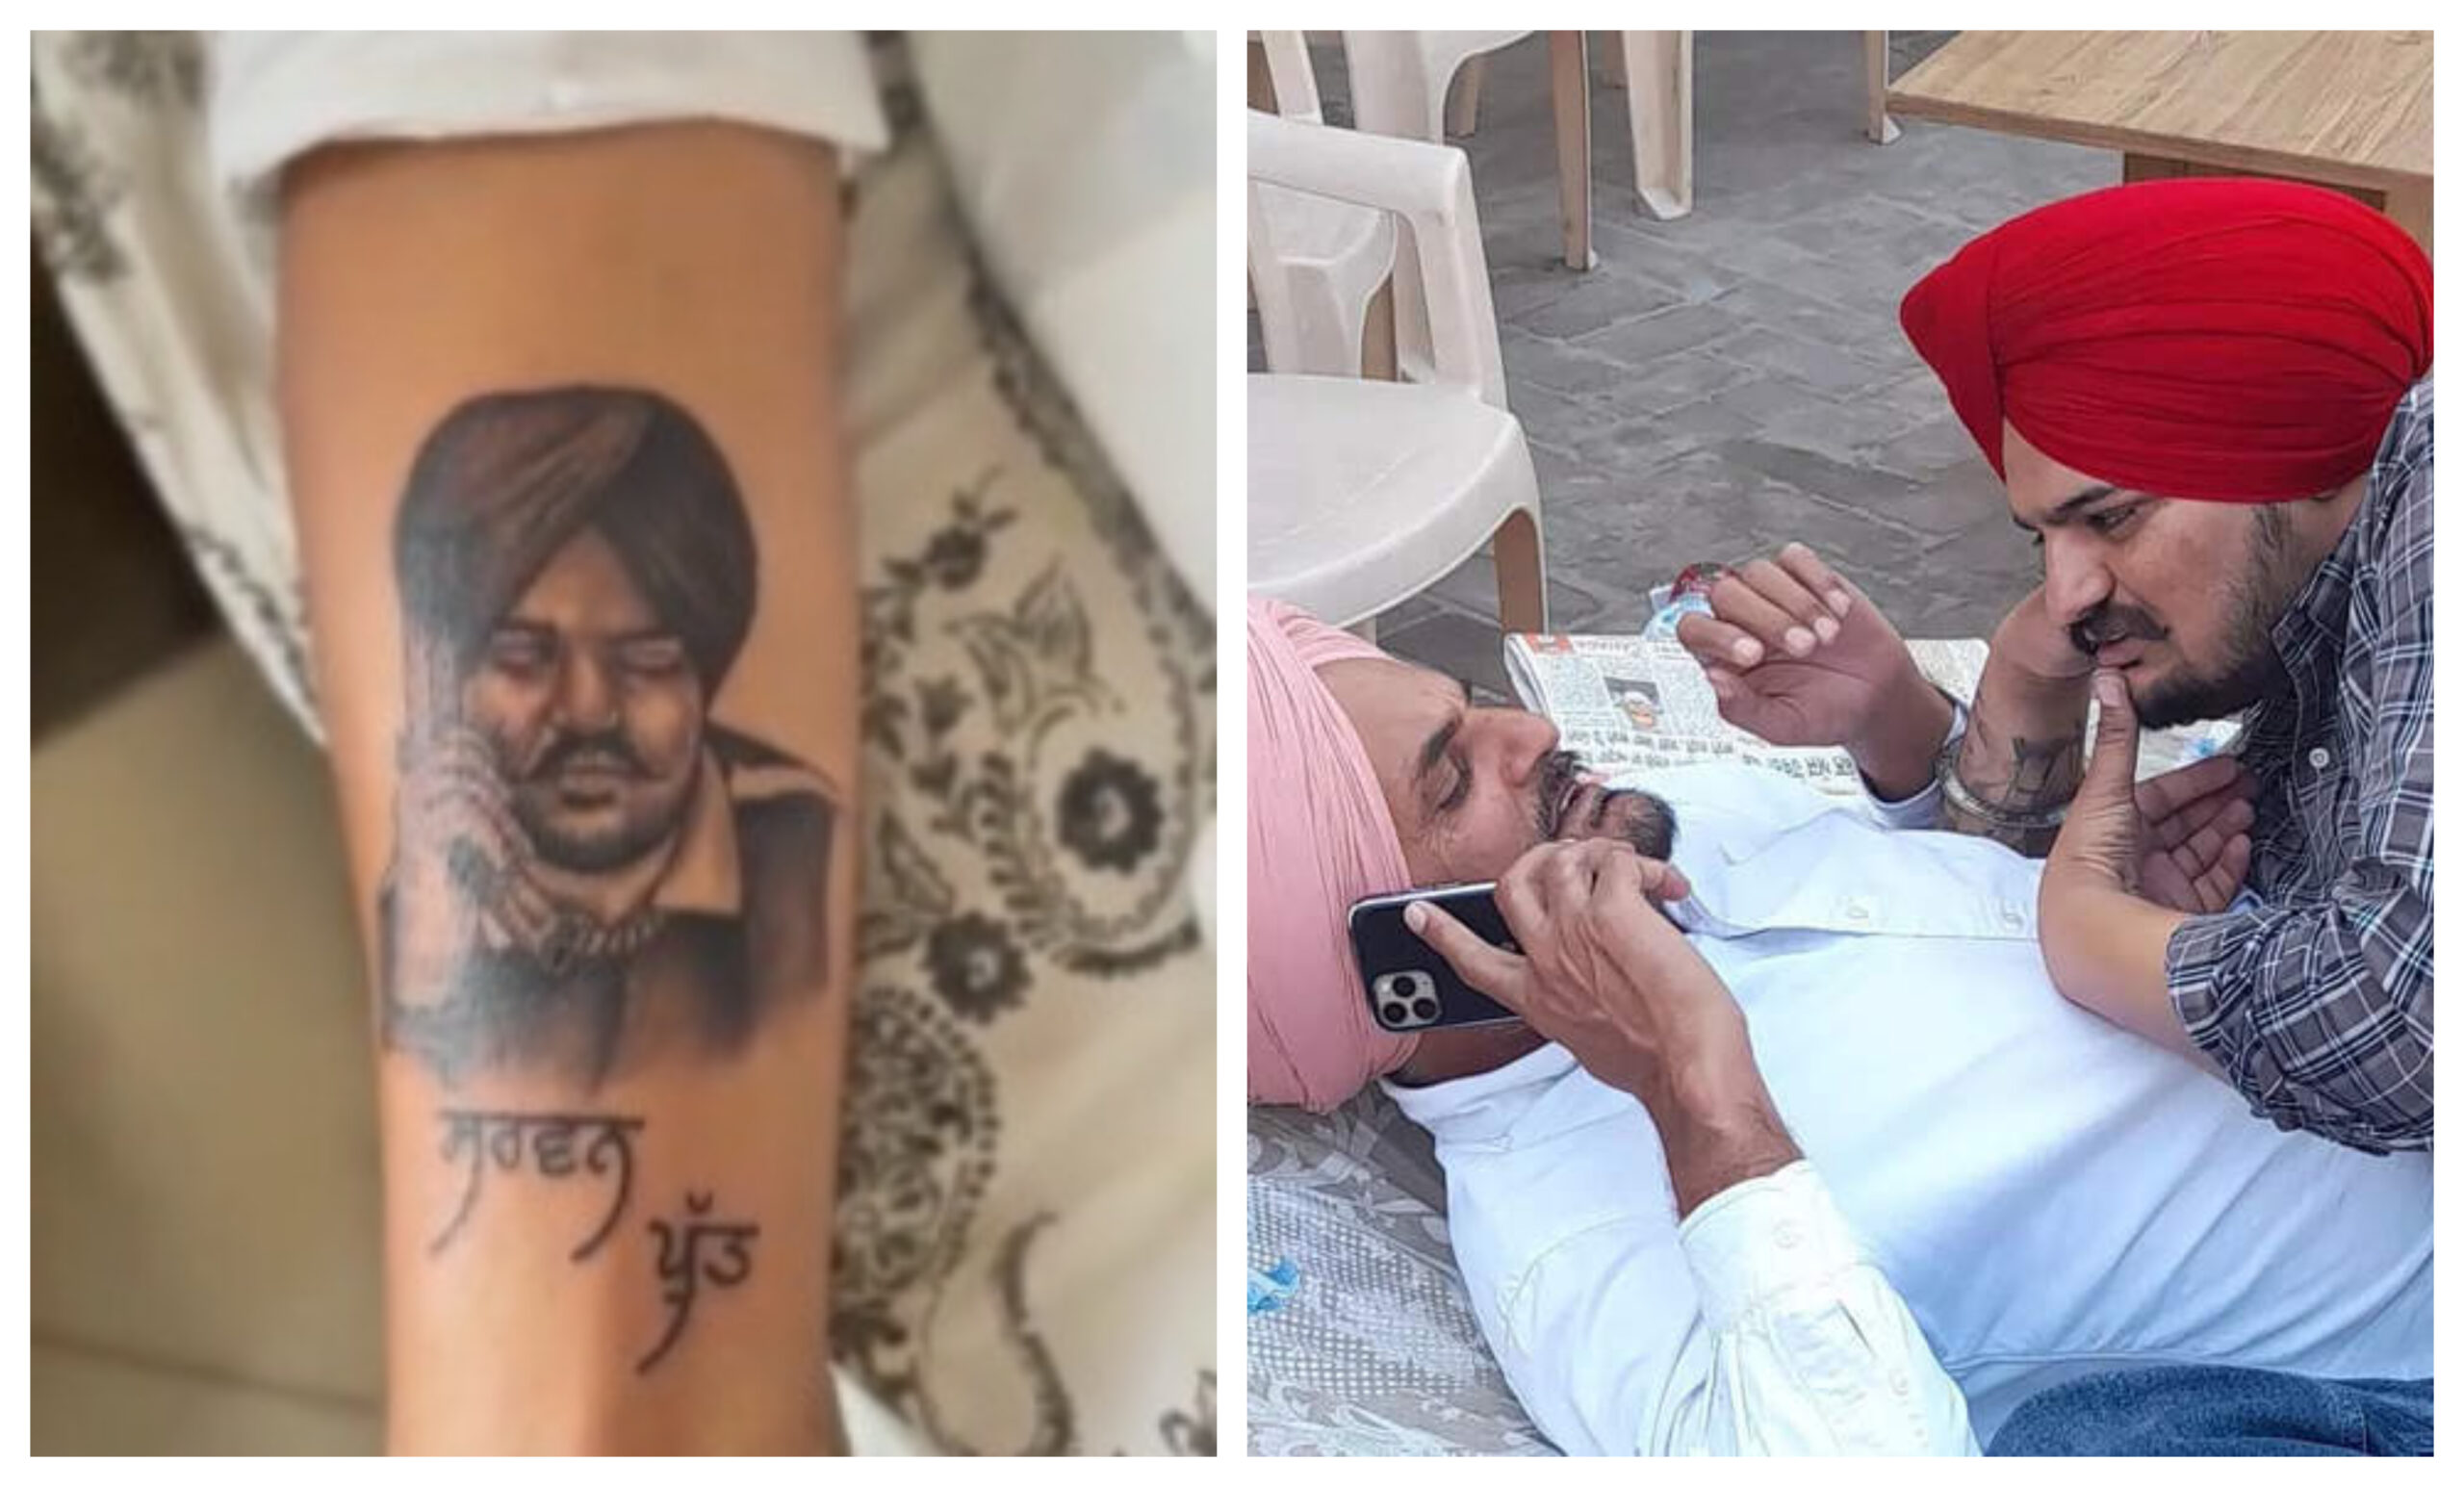 Sidhu Moose Wala's parents get tattooed to give tribute